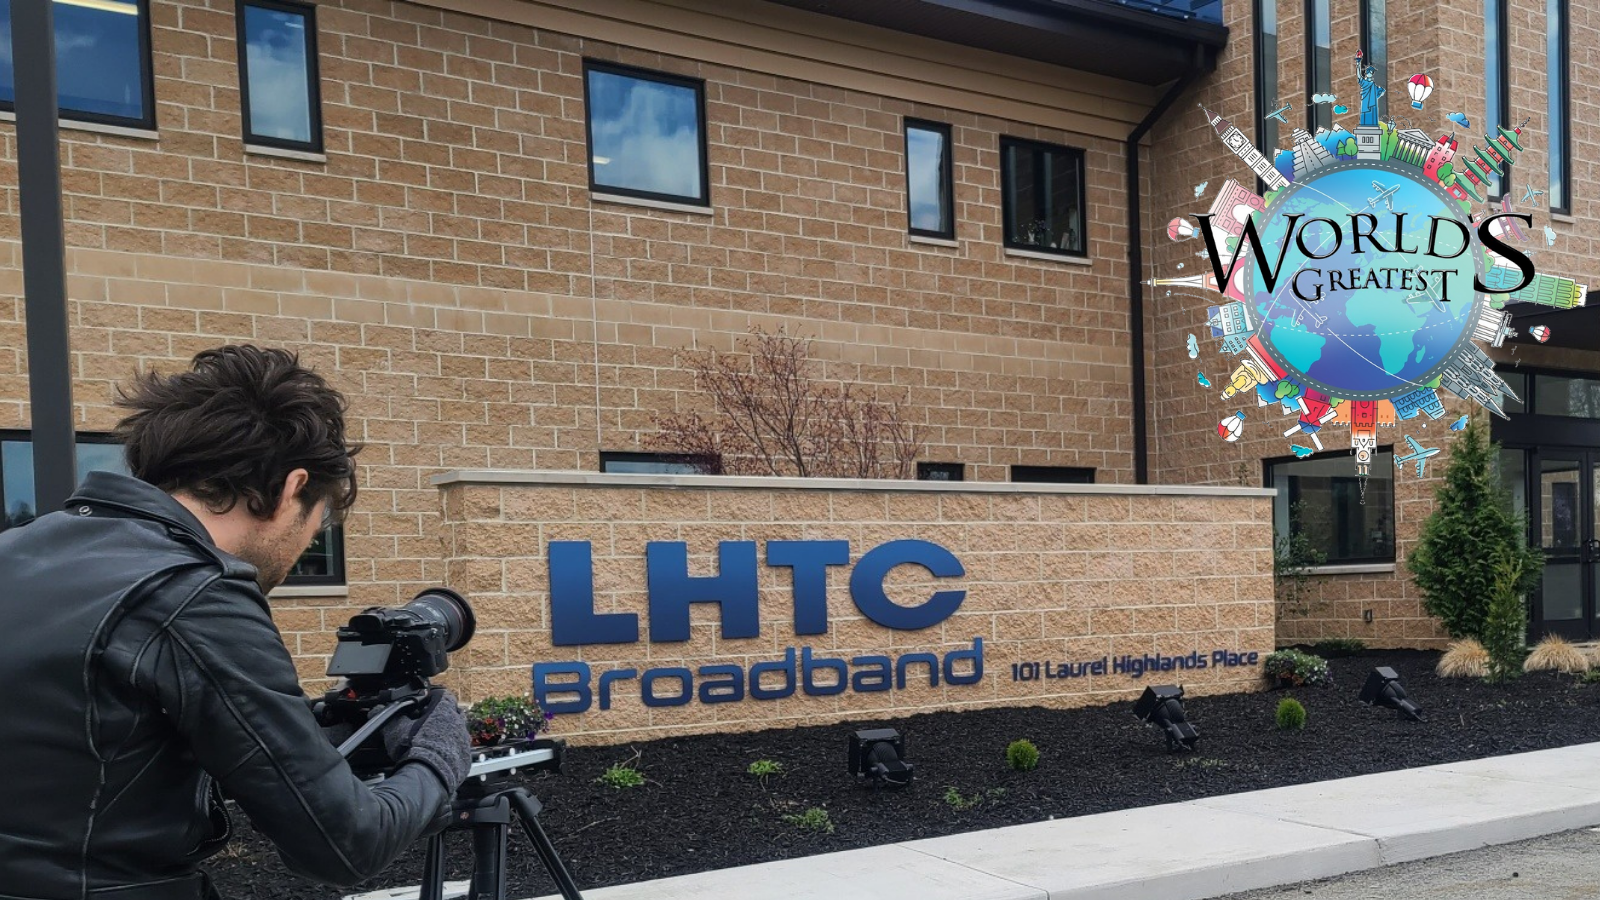 How2Media announces that LHTC Broadband will be part of its “World’s Greatest!…” series